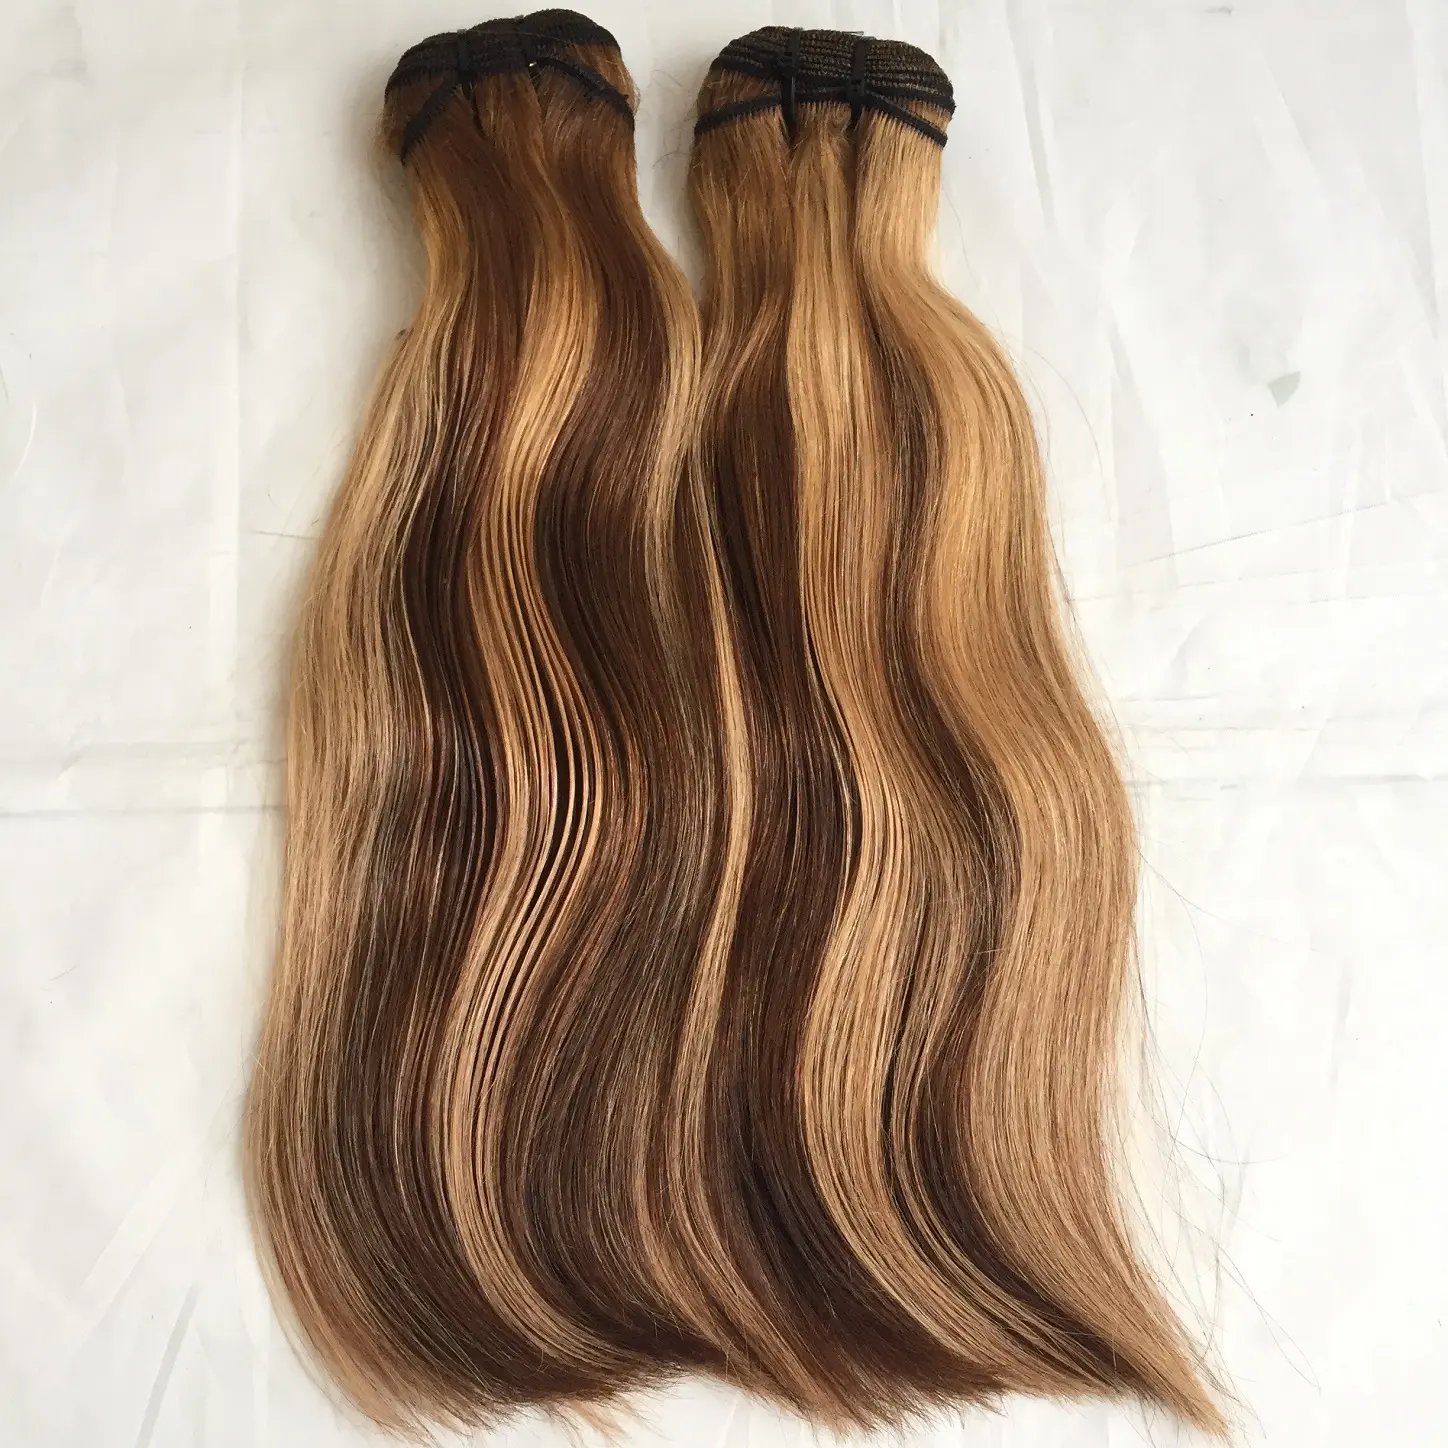 virgin indian human hair,wholesale raw indian temple hair in india, aligned human hair extension